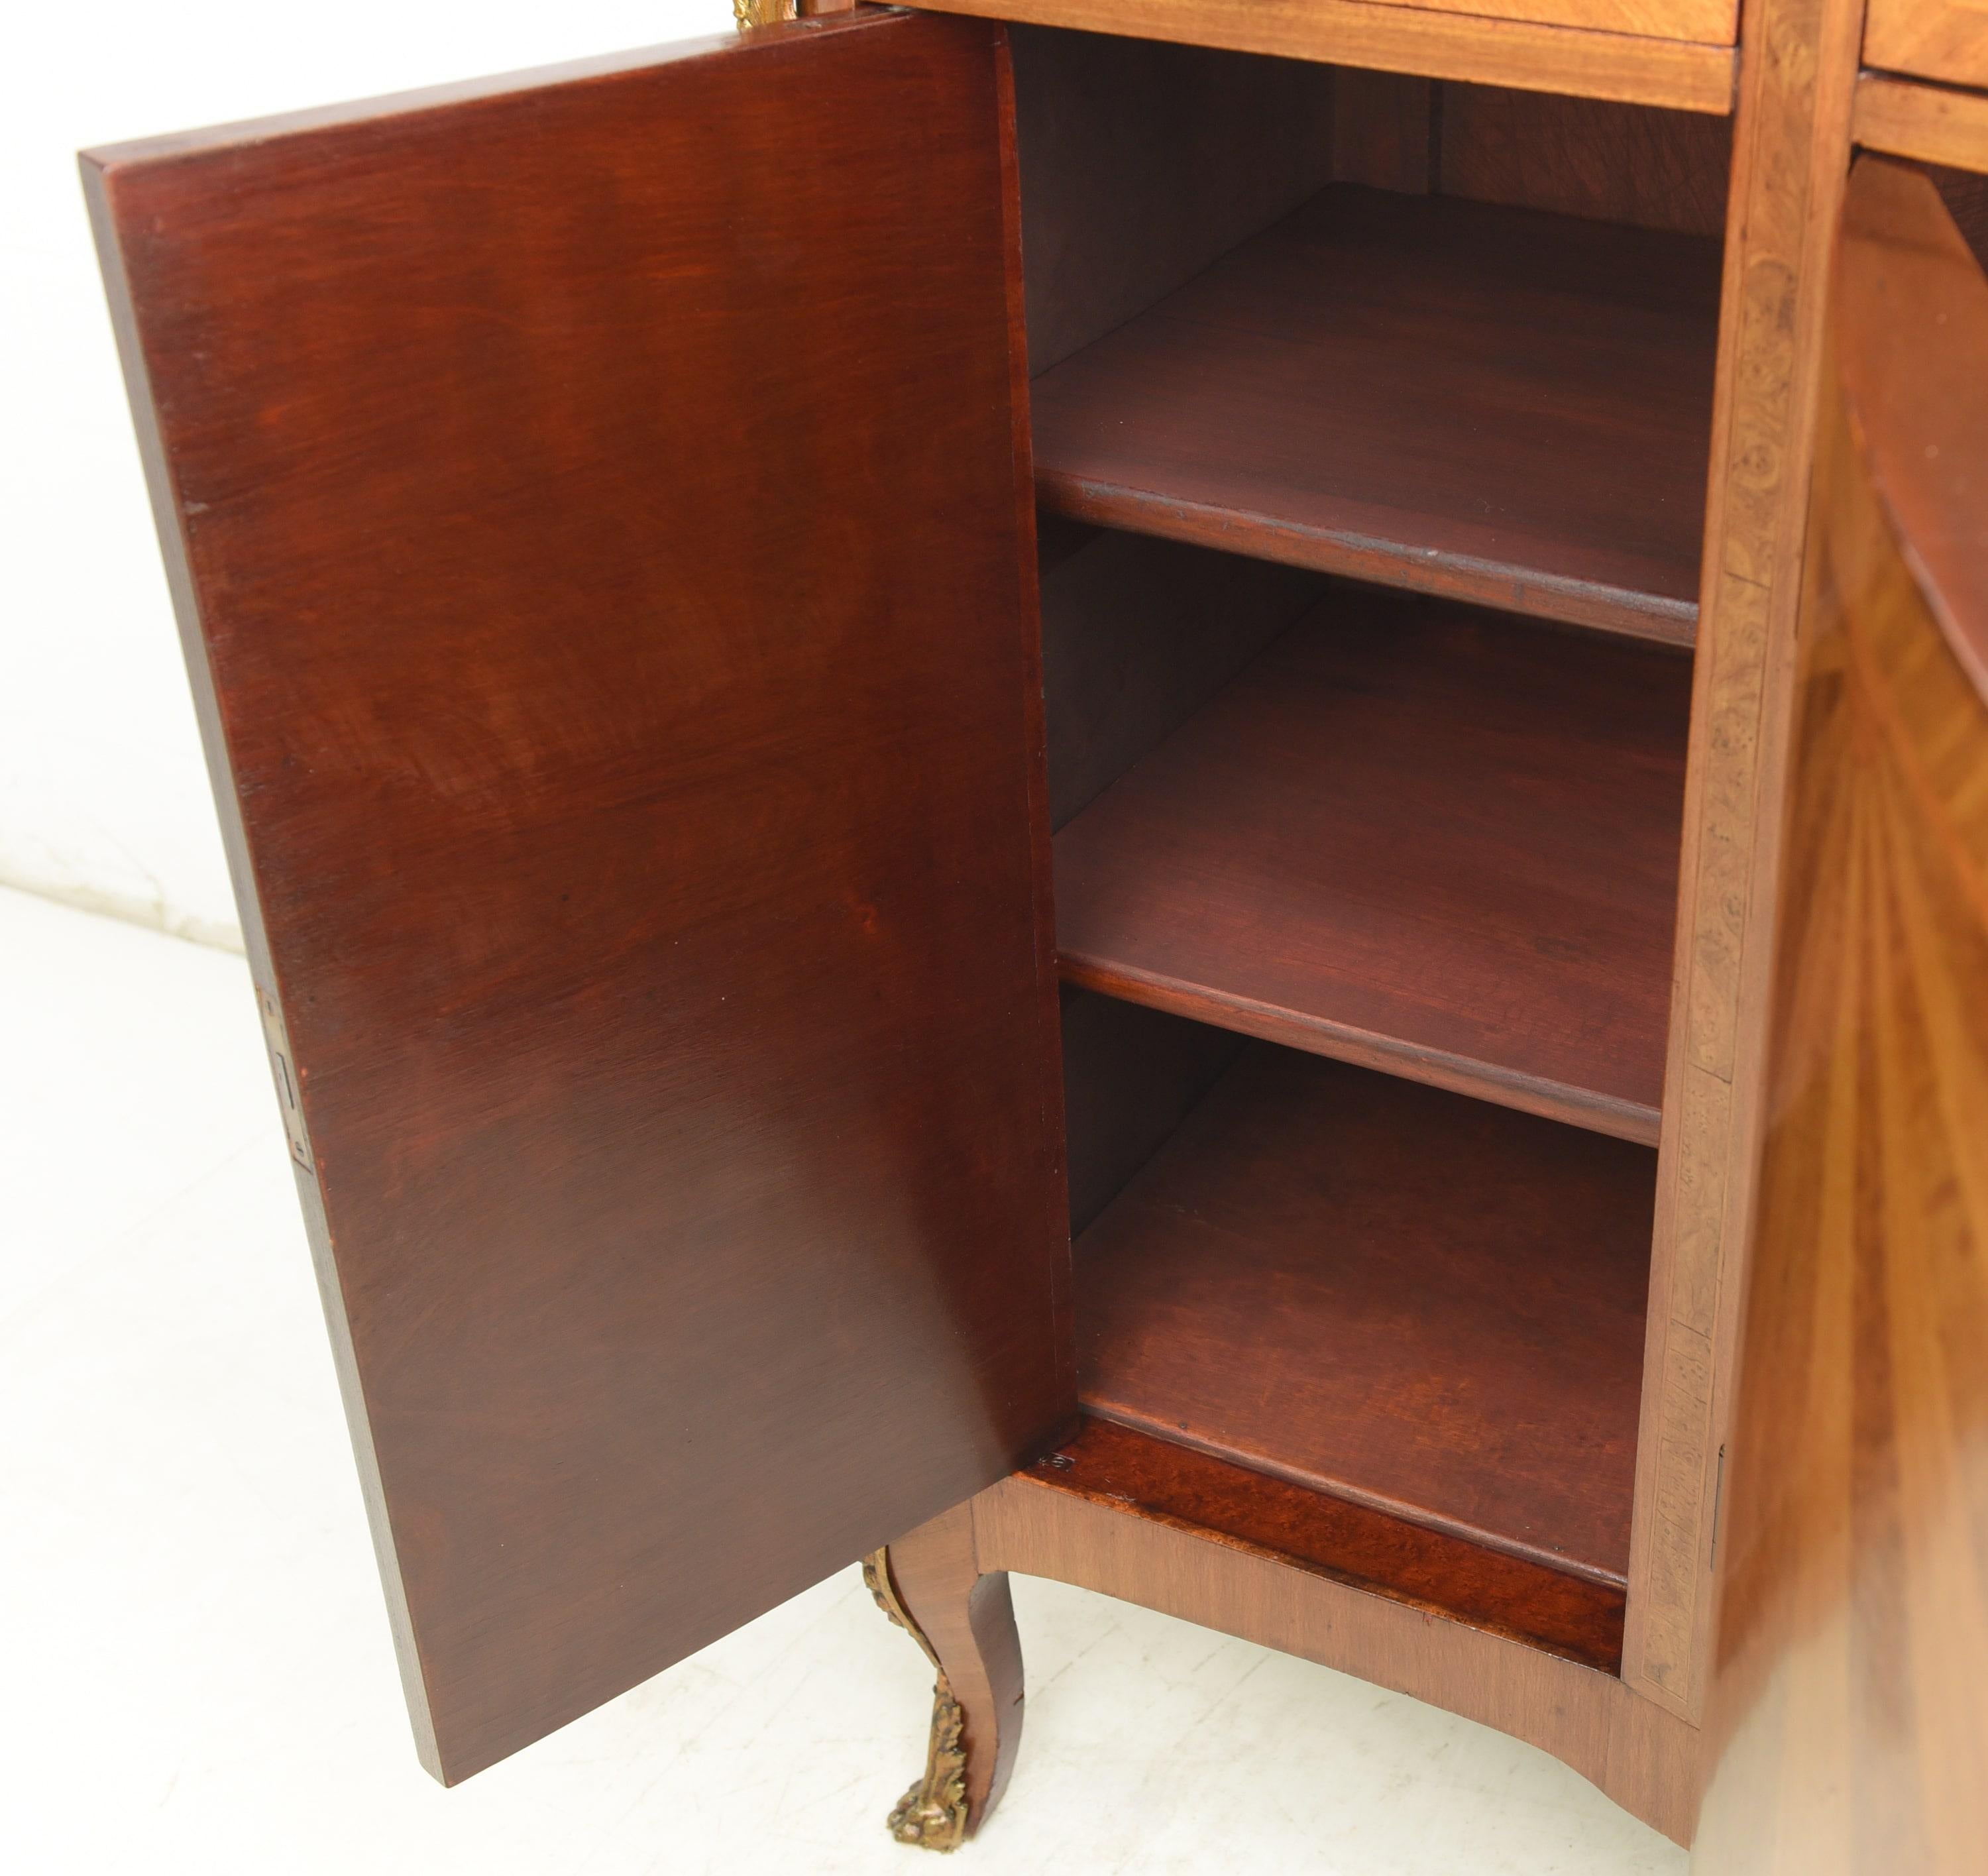 20th Century Art Deco Sideboard / Chest of Drawers / Dresser in Mahogany, circa 1925